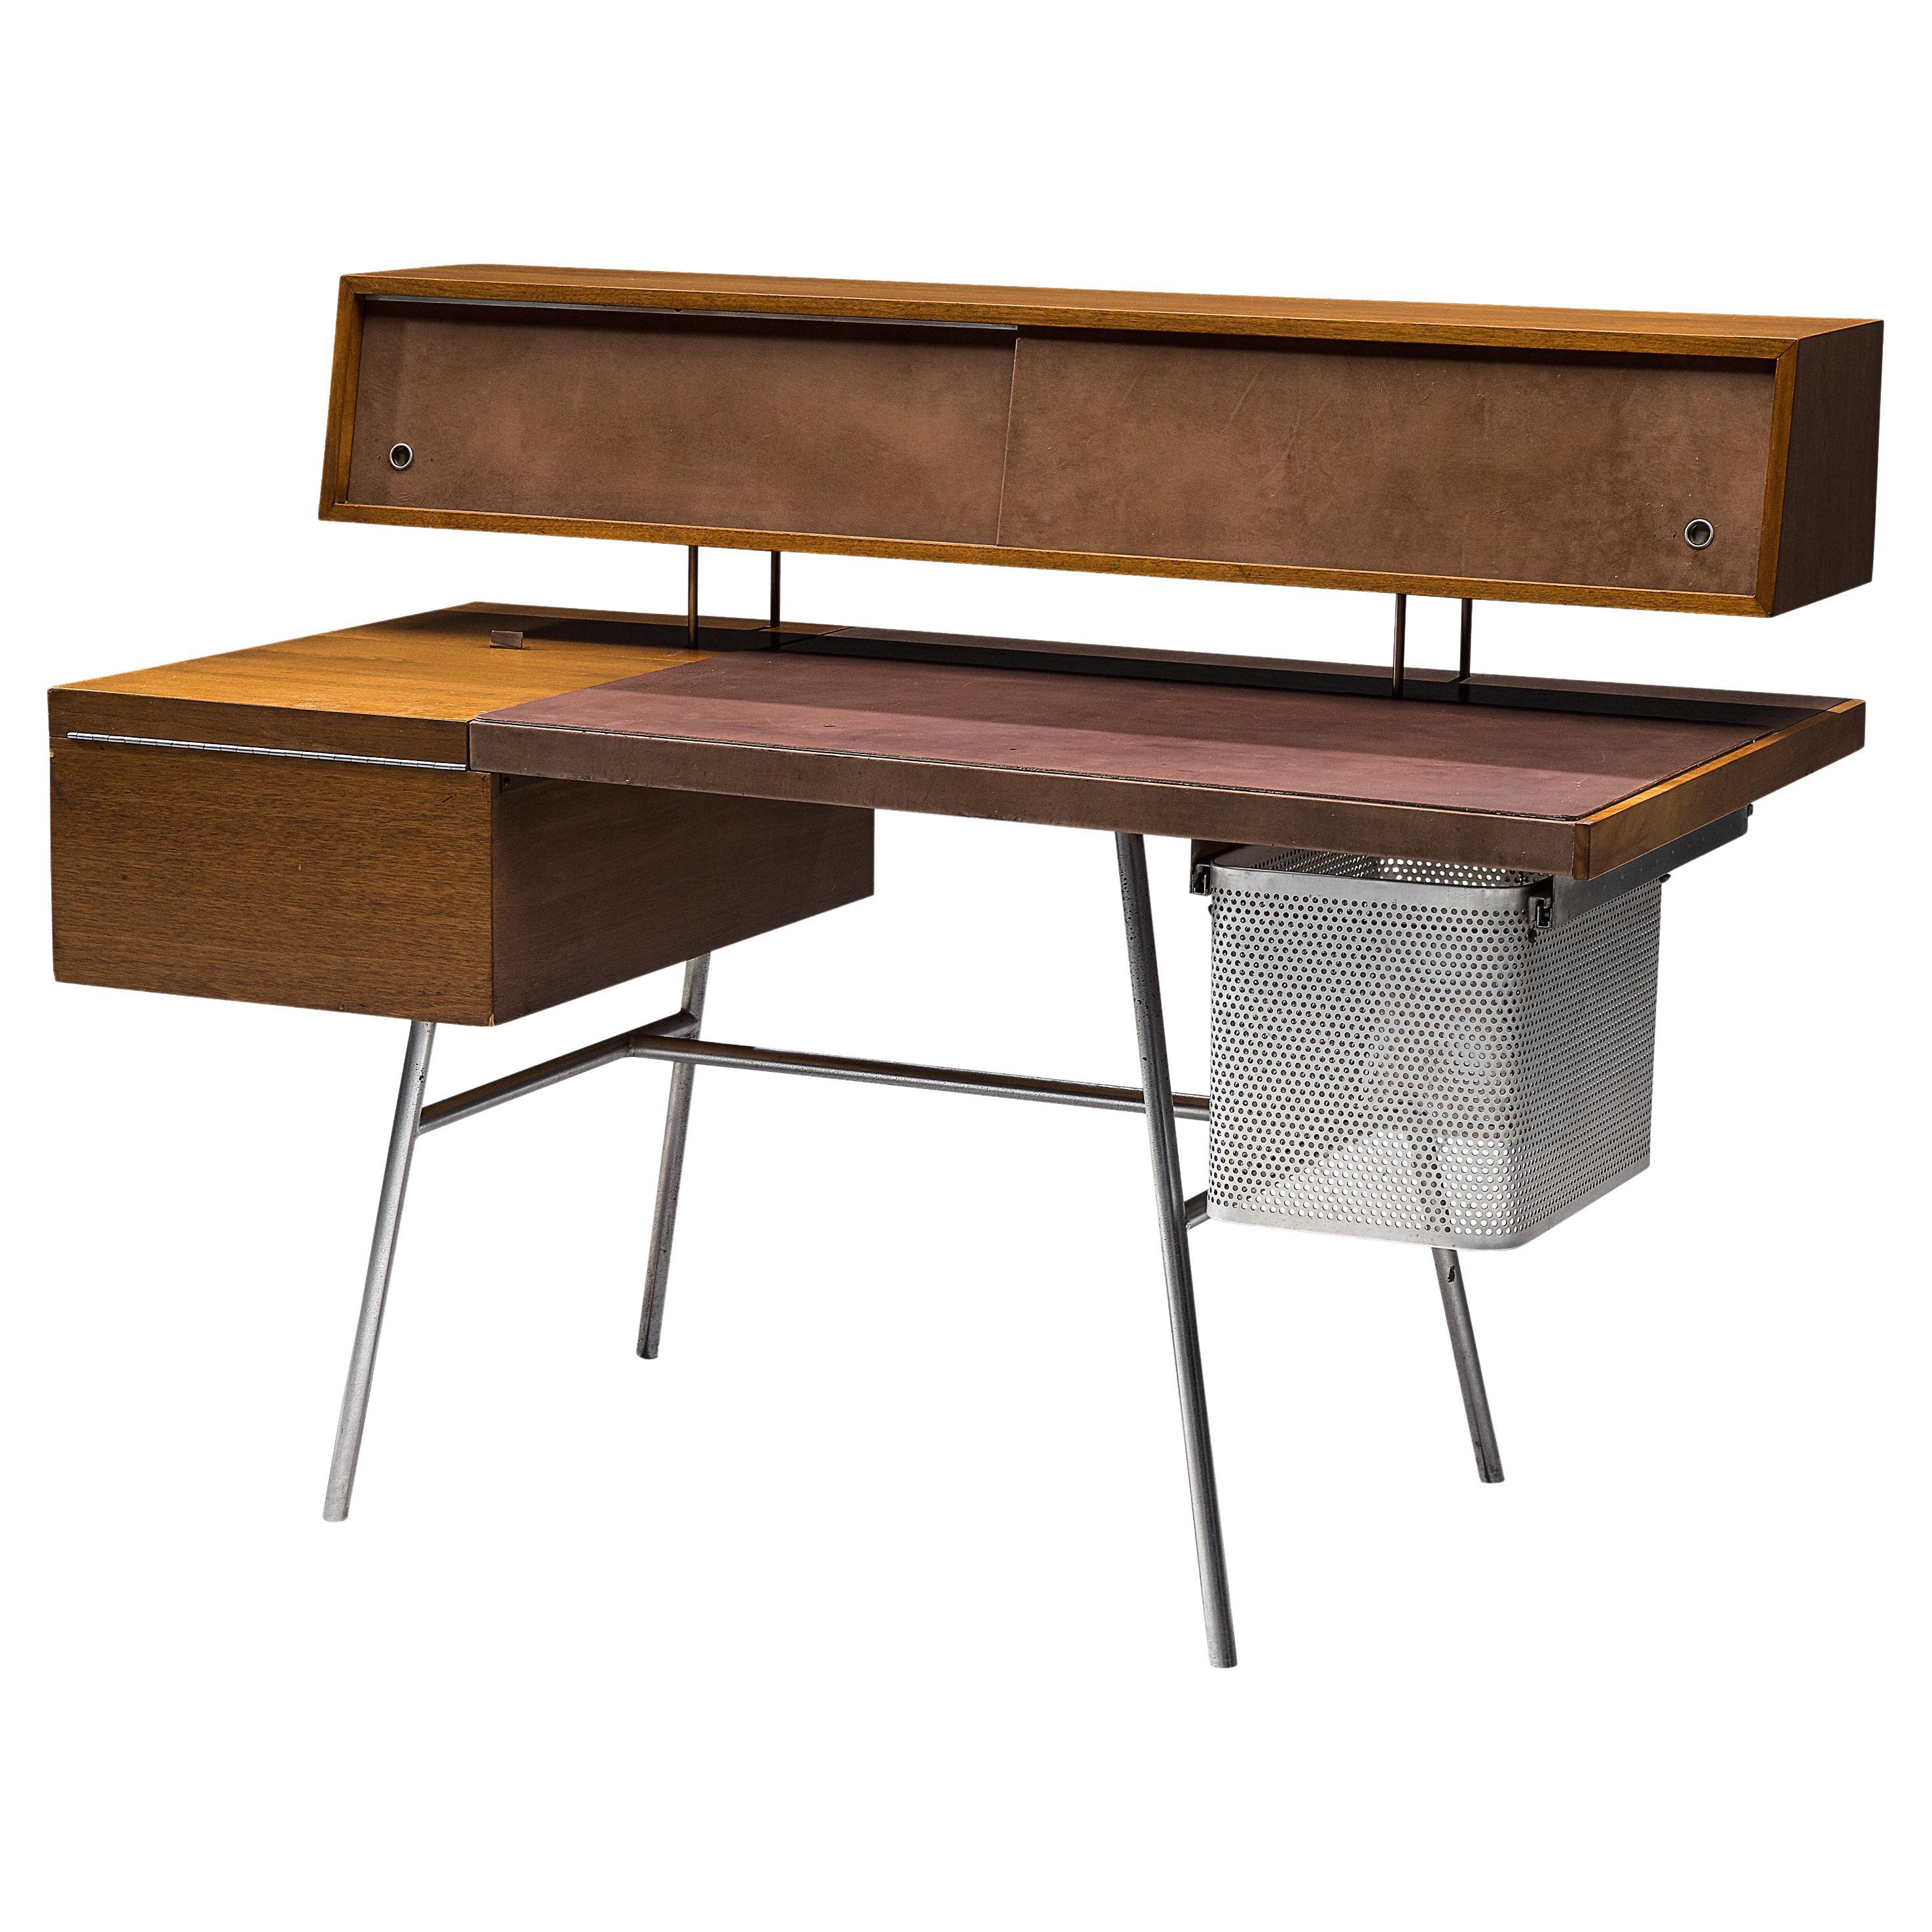 George Nelson for H. Miller Desk Model '4658' in Walnut, Leather and Steel